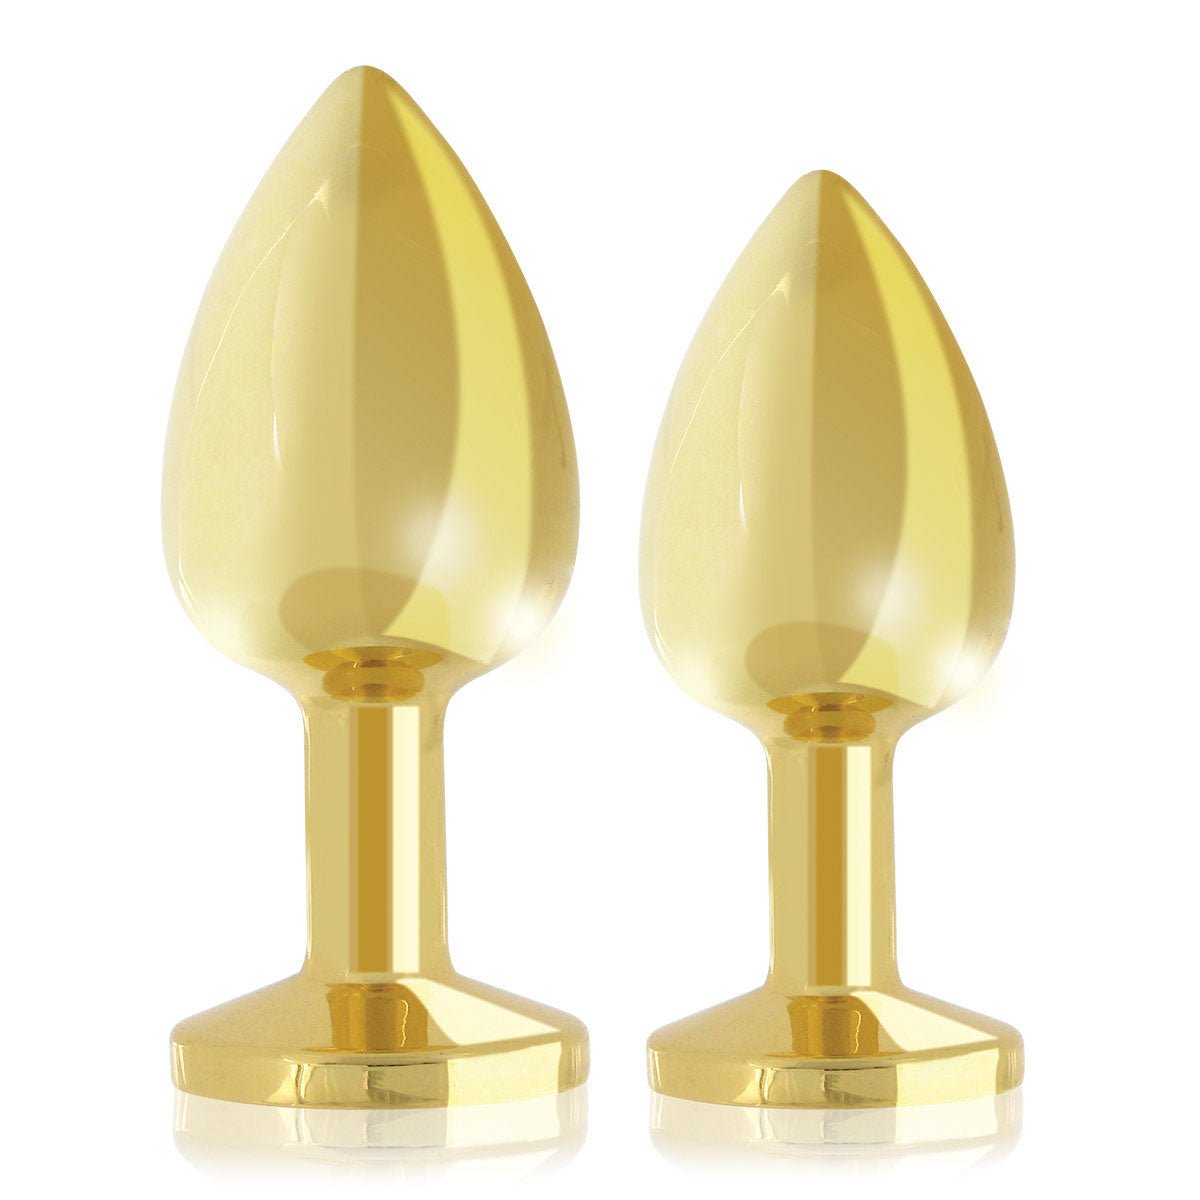 Rianne S Booty Plug Set - 2 Gold Stainless Steel Gem Butt Plugs - Sex Toys